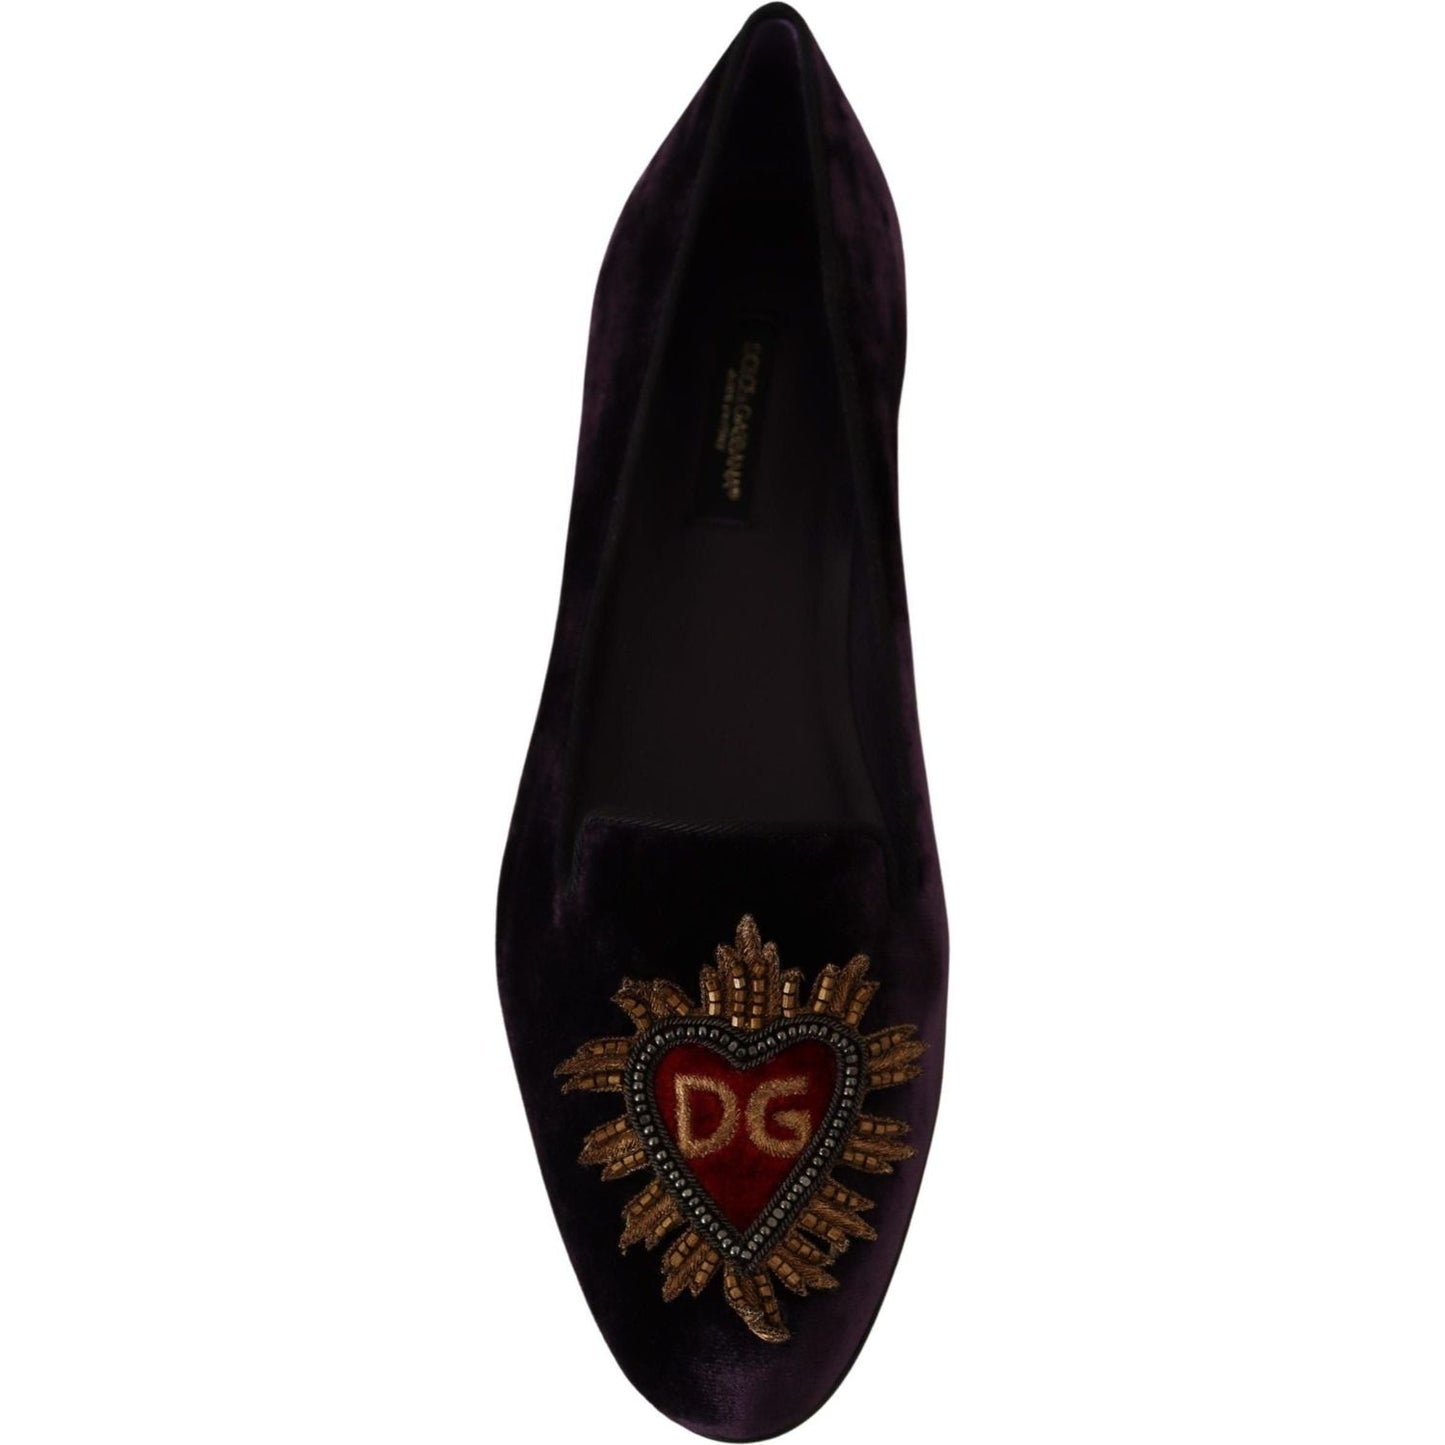 Dolce & Gabbana Chic Purple Velvet Loafers with Heart Detail purple-velvet-dg-heart-loafers-flats-shoes IMG_6025-scaled-e17a23f4-909.jpg